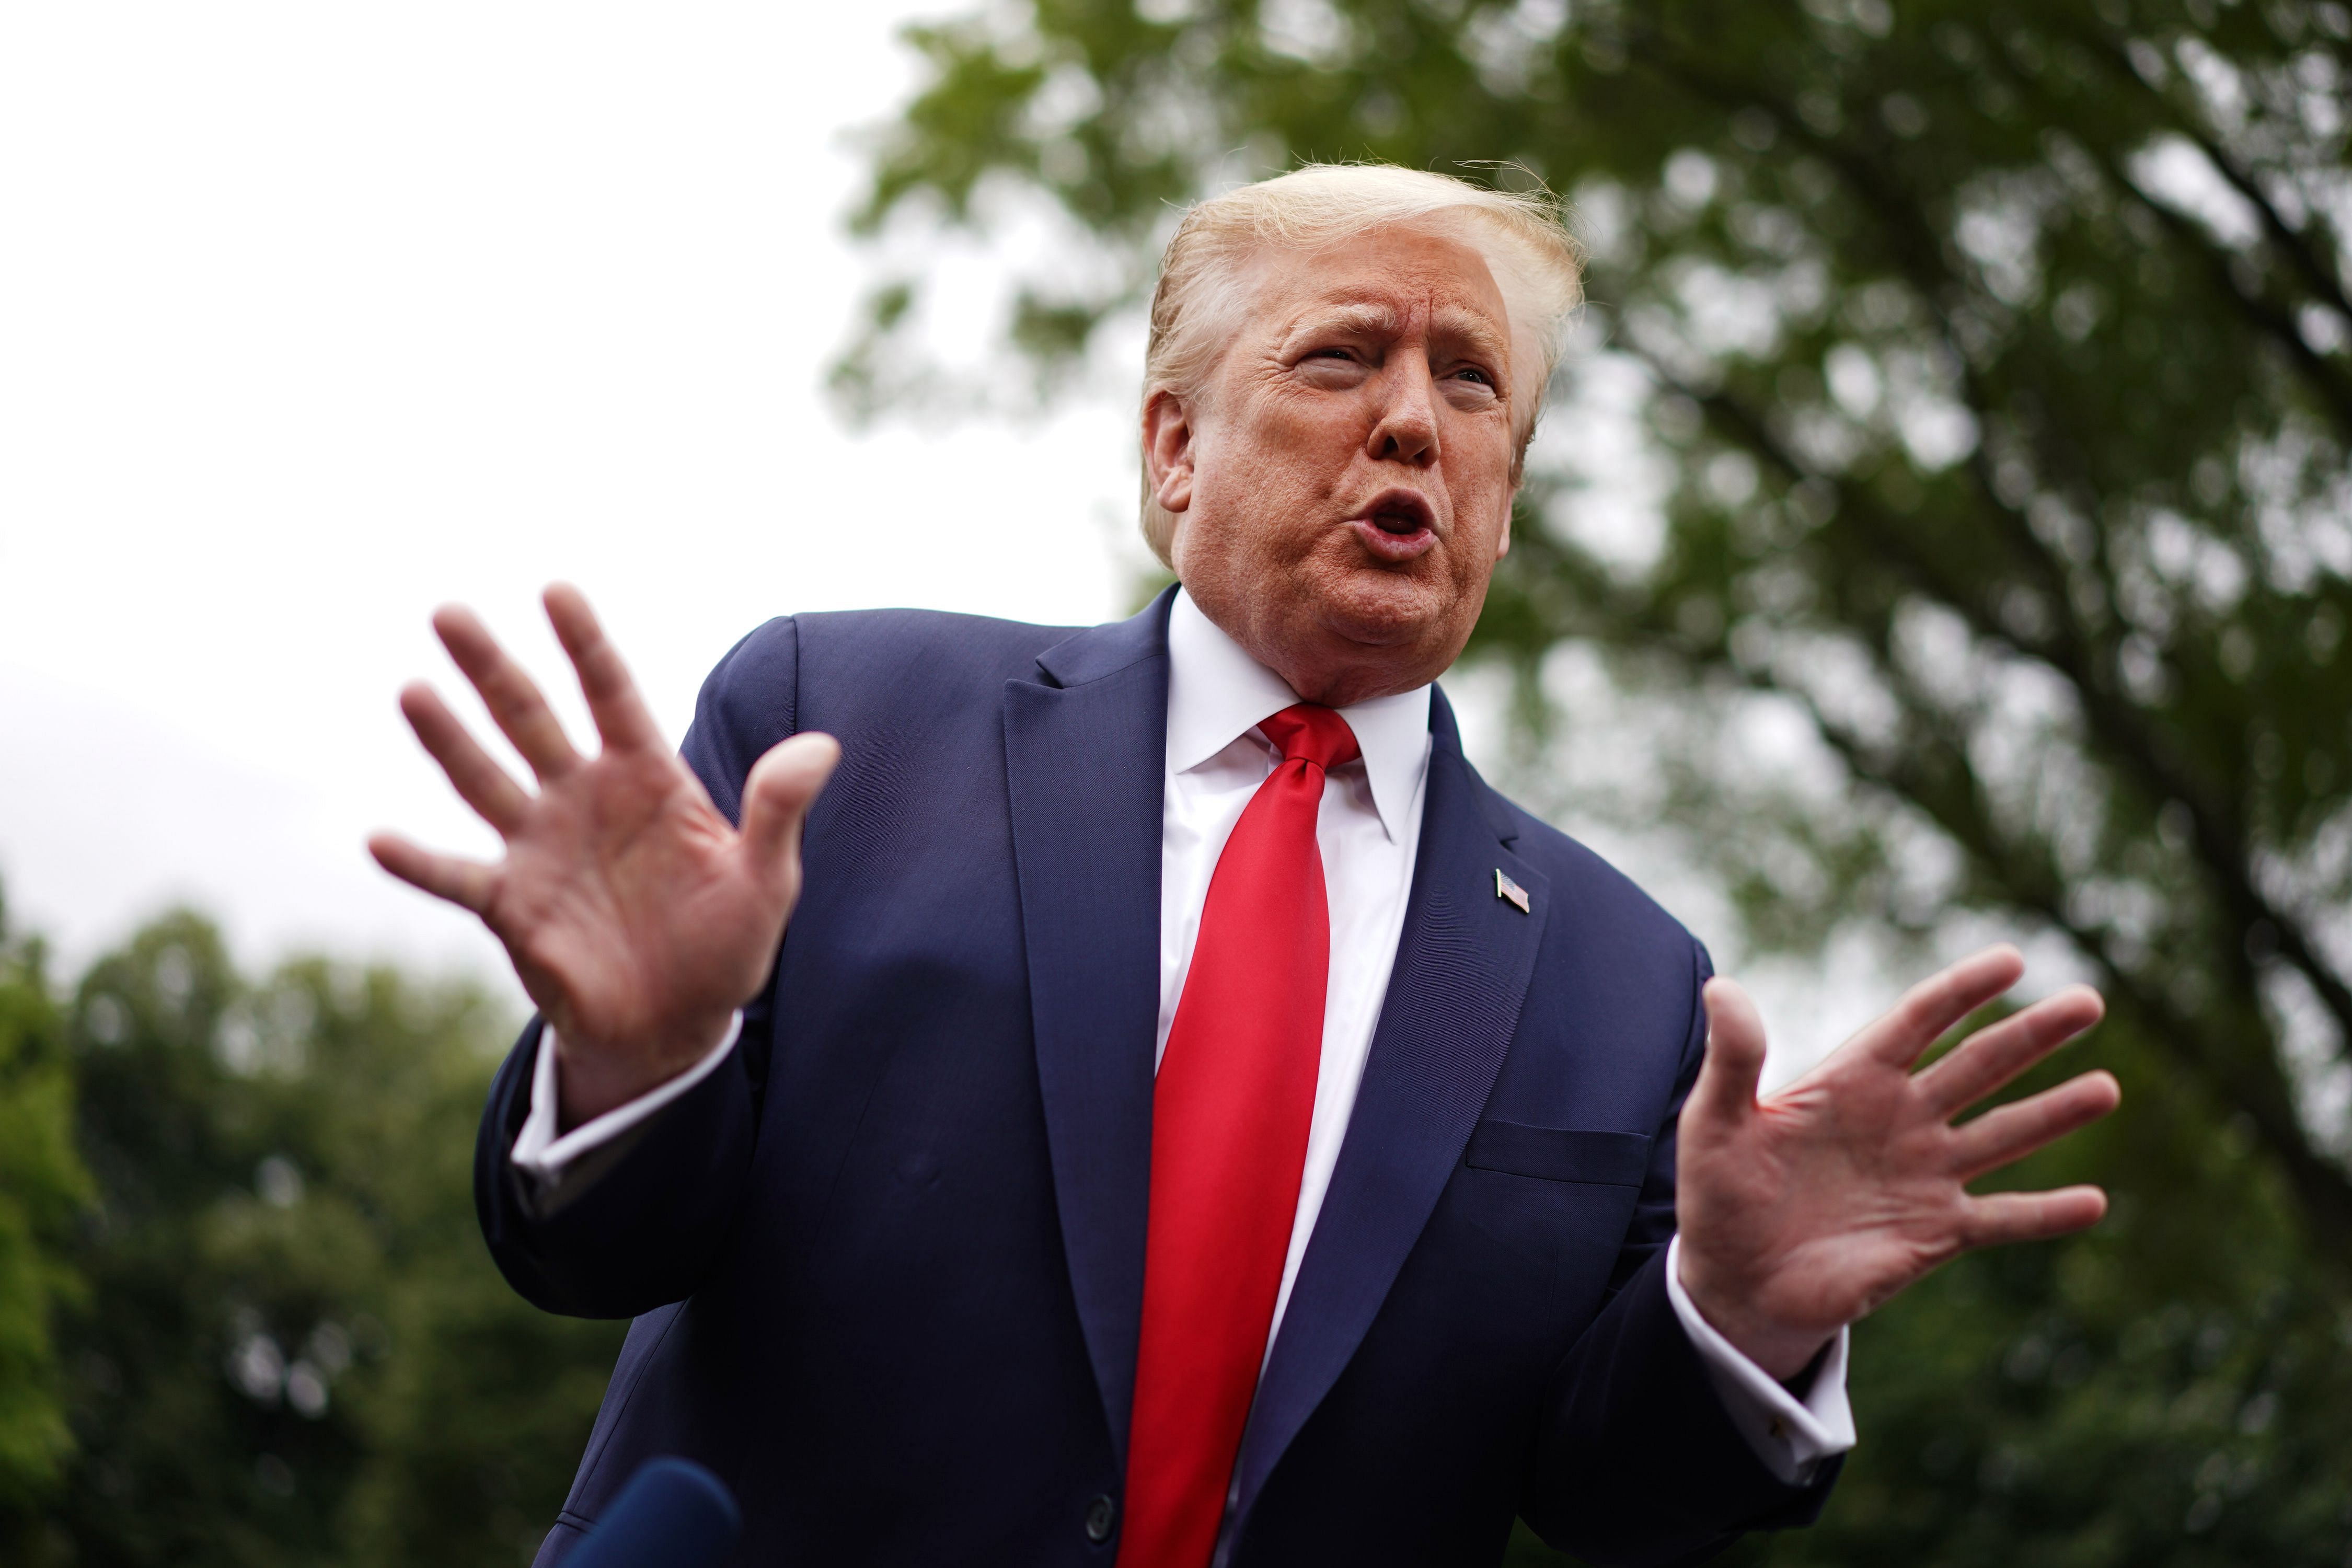 Trump said Thursday that the United States is withdrawing from the Open Skies arms control treaty with Russia, accusing Moscow of breaking the terms. (Photo by AFP)